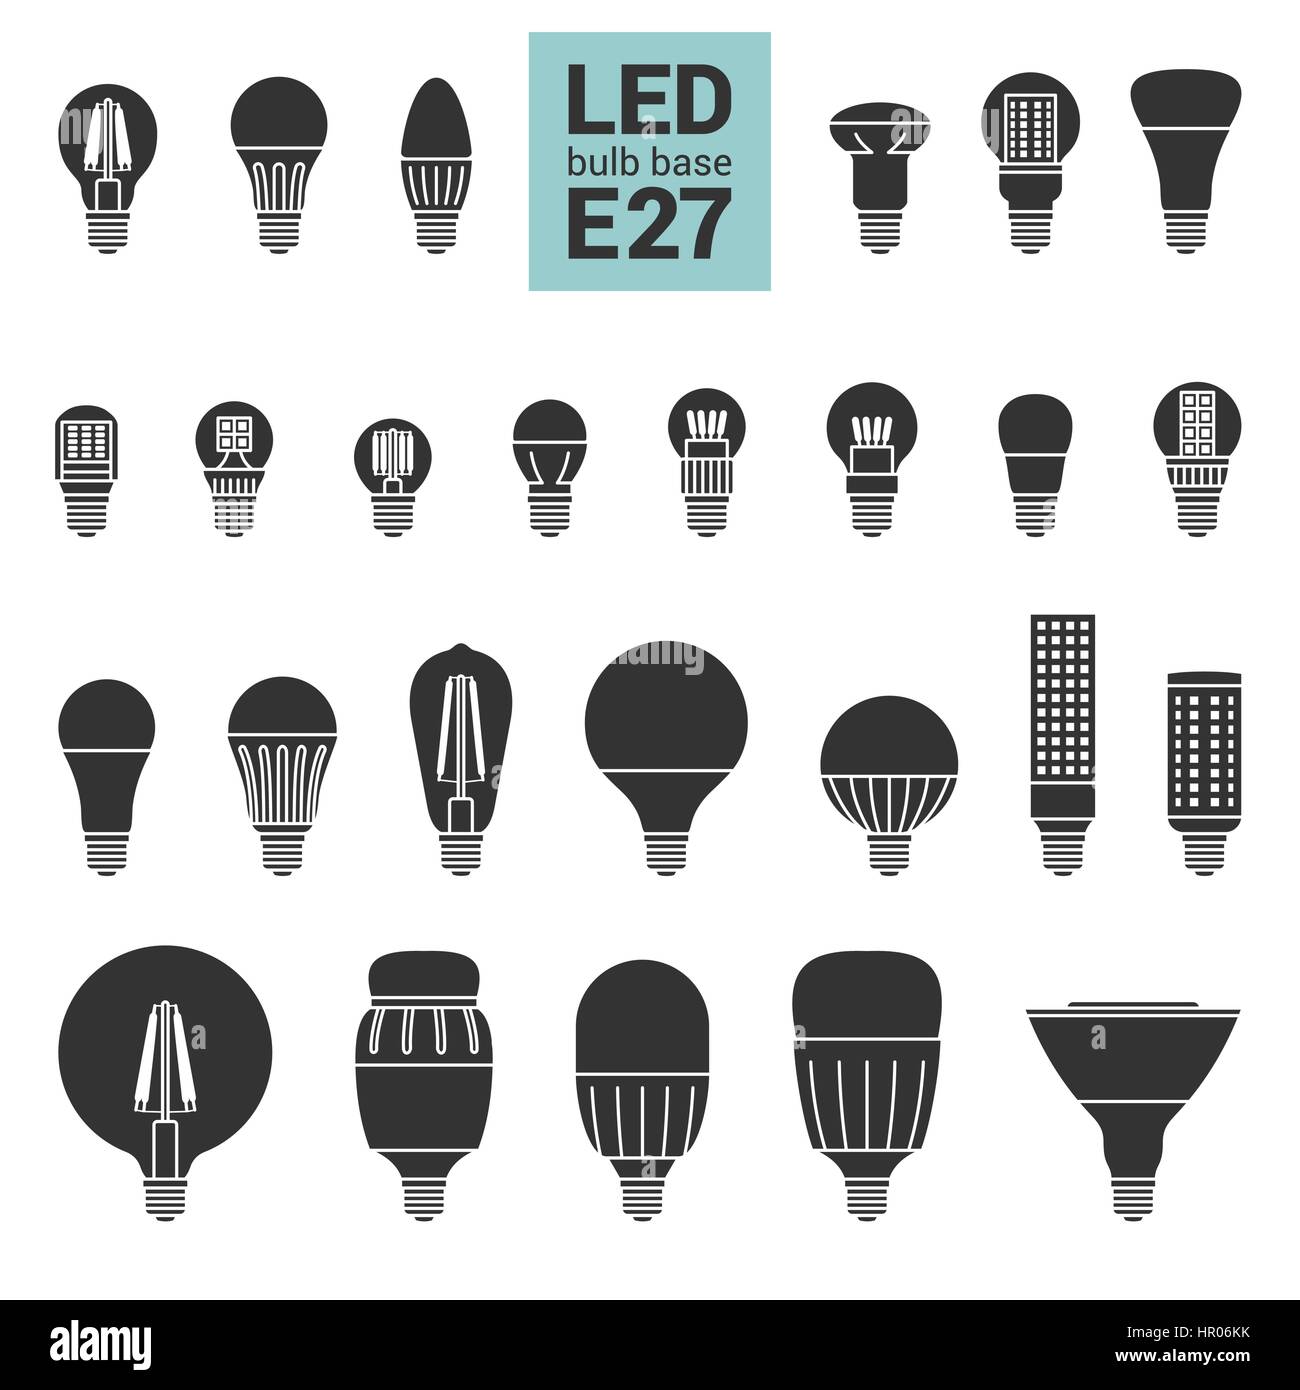 LED light bulbs with E27 base, vector silhouette icon set on white background Stock Vector